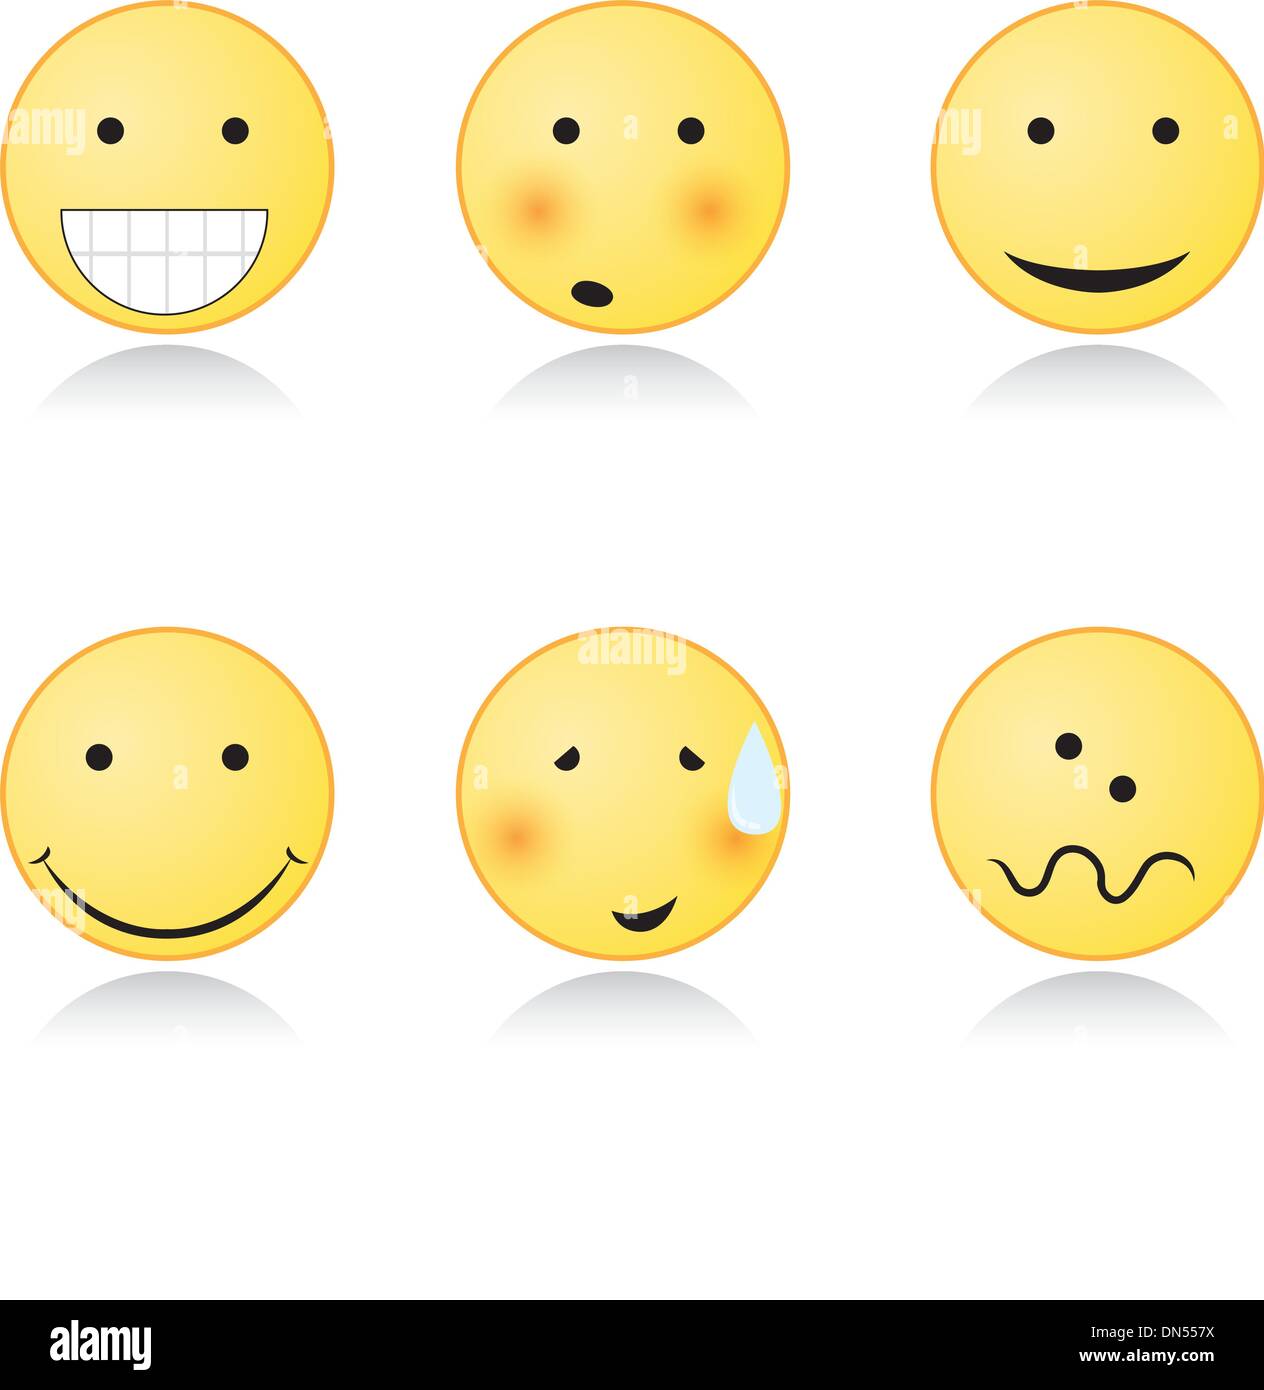 cute smile icons Stock Vector